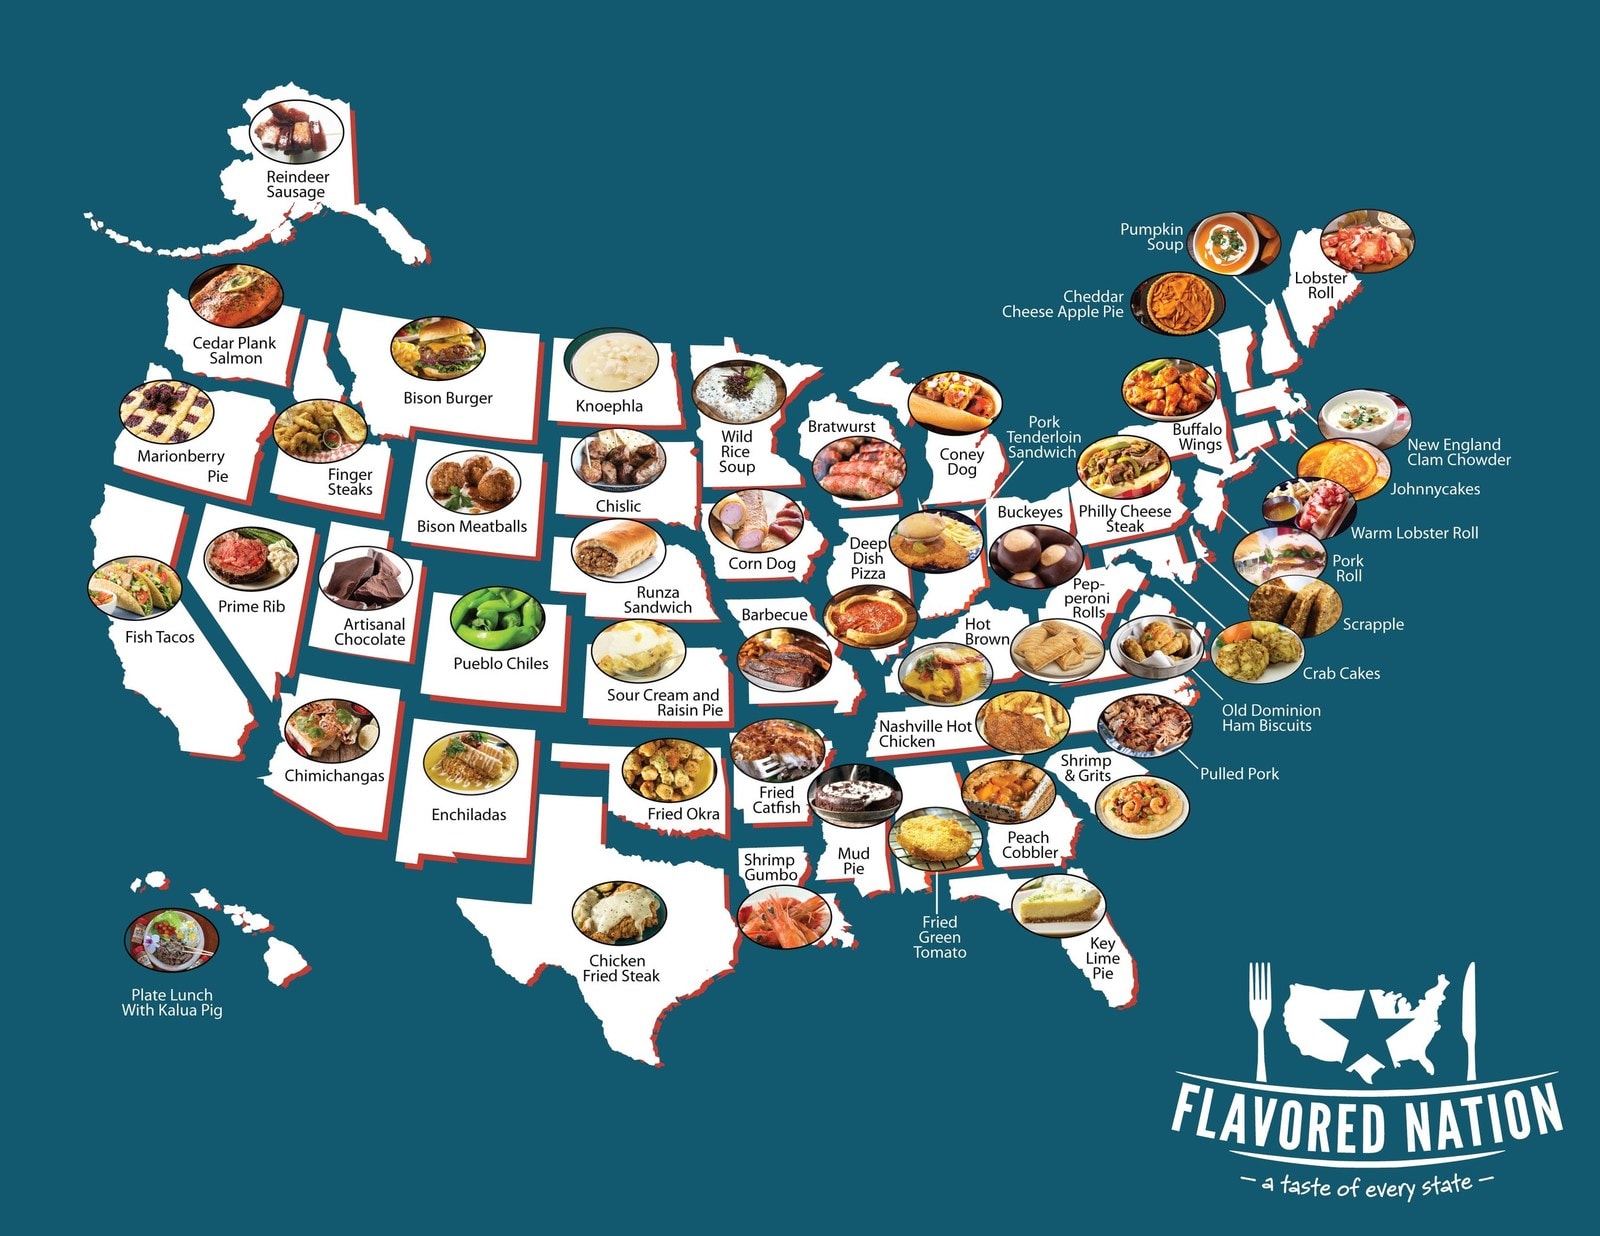 Most iconic foods across the 50 states, got a fork?